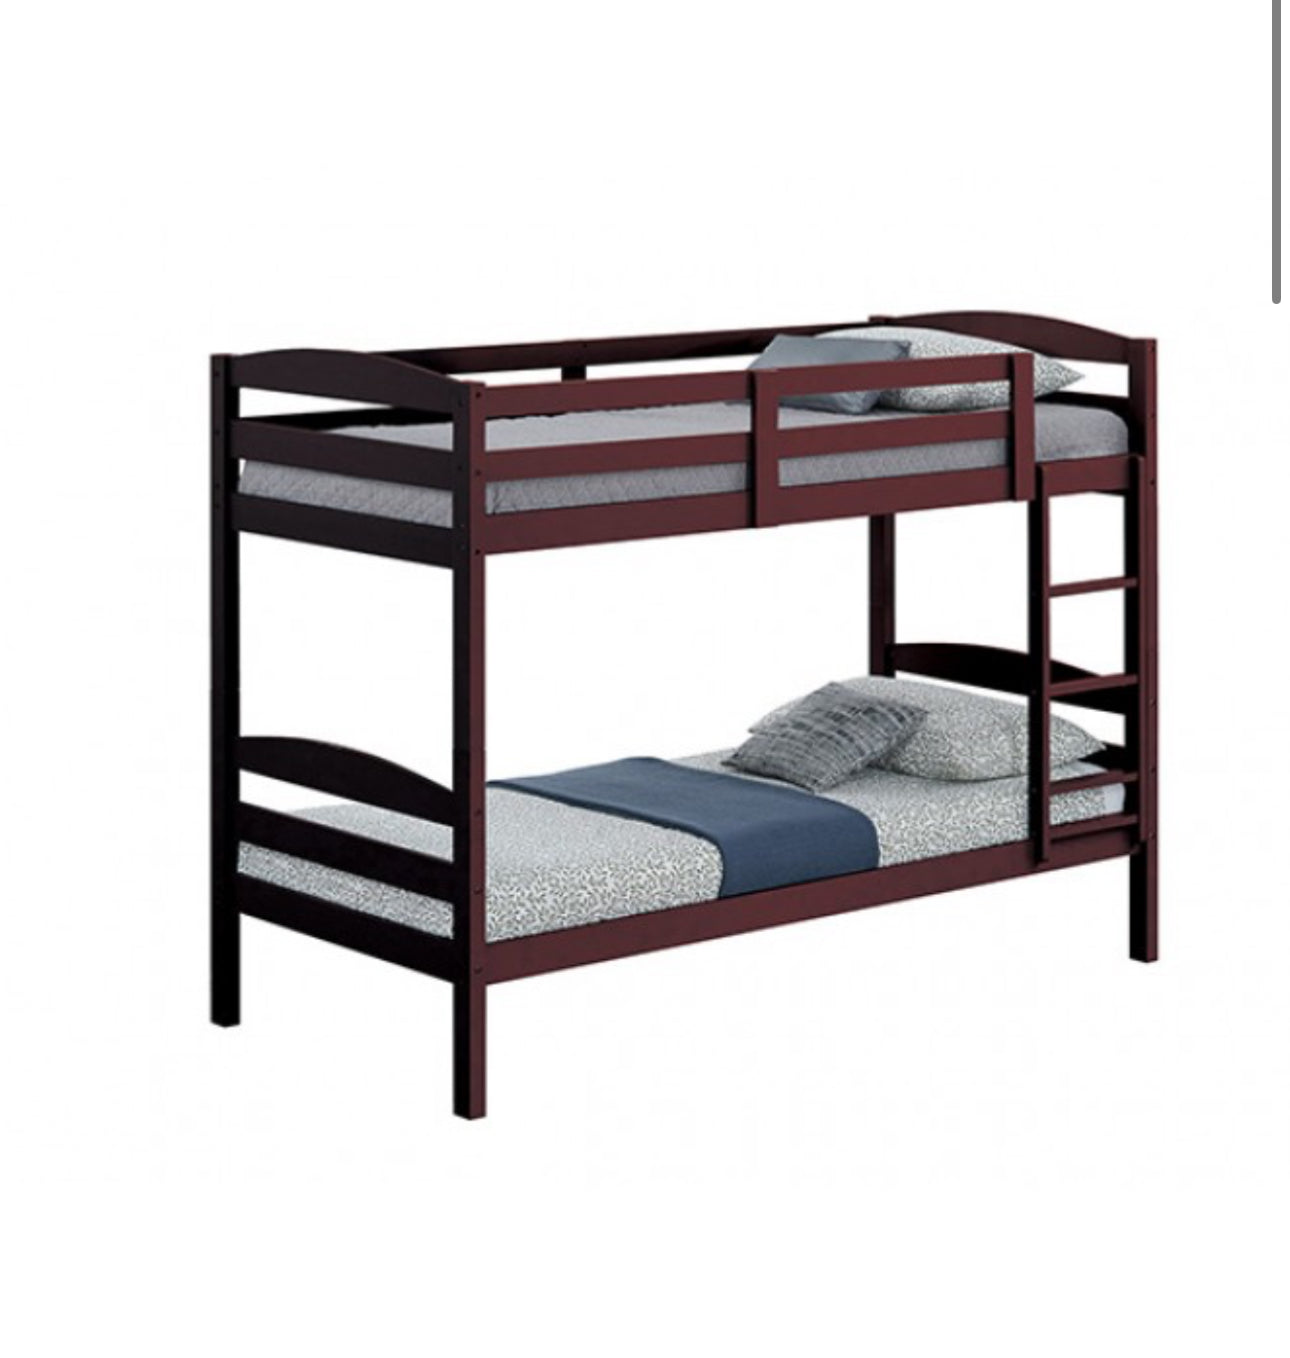 TWIN OVER TWIN BUNK BEDS